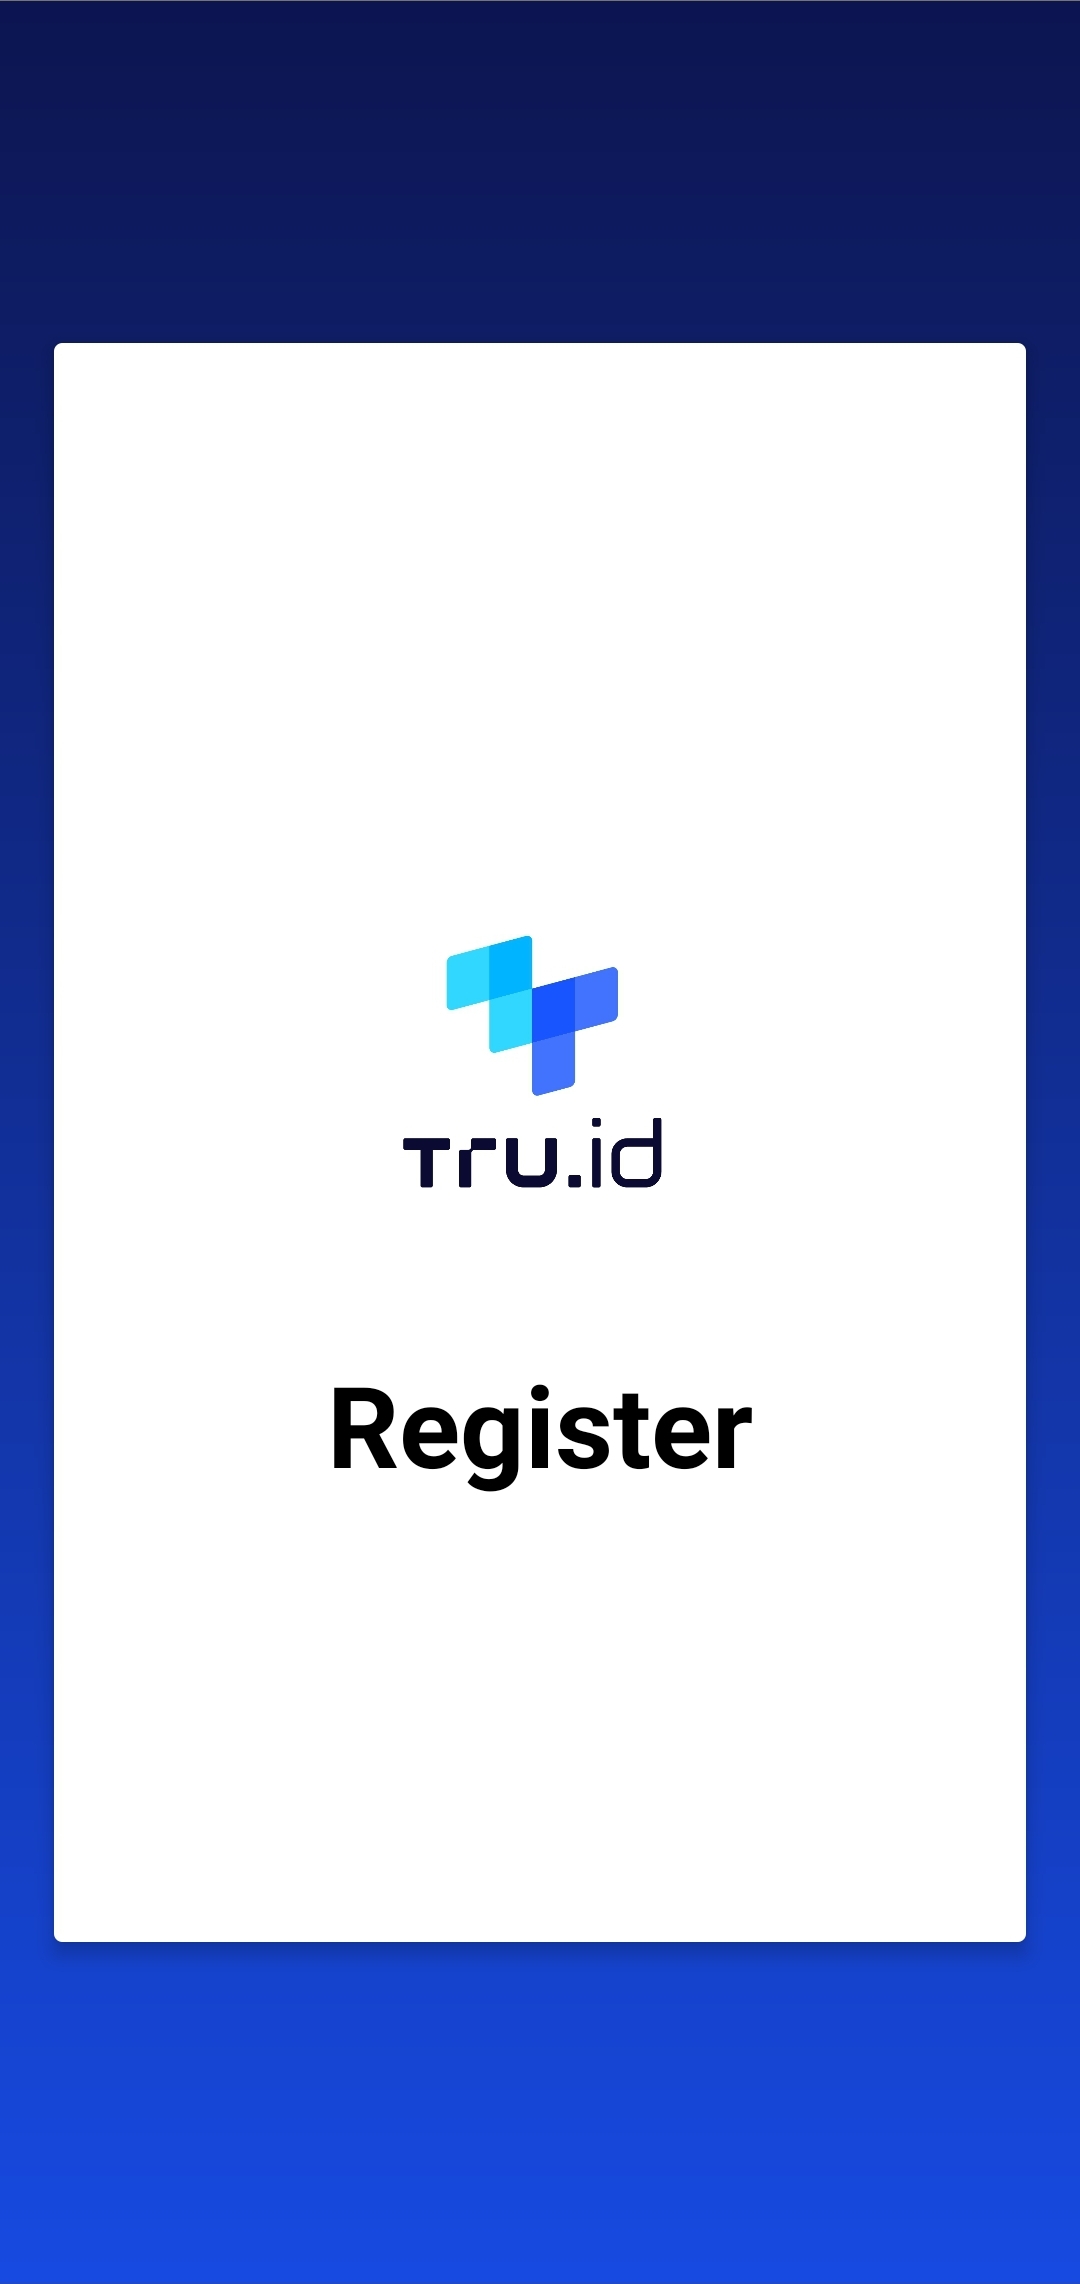 A tru.ID mobile app screen showing a blue background, smaller white box area with a tru.ID logo and a label containing the text 'Register'